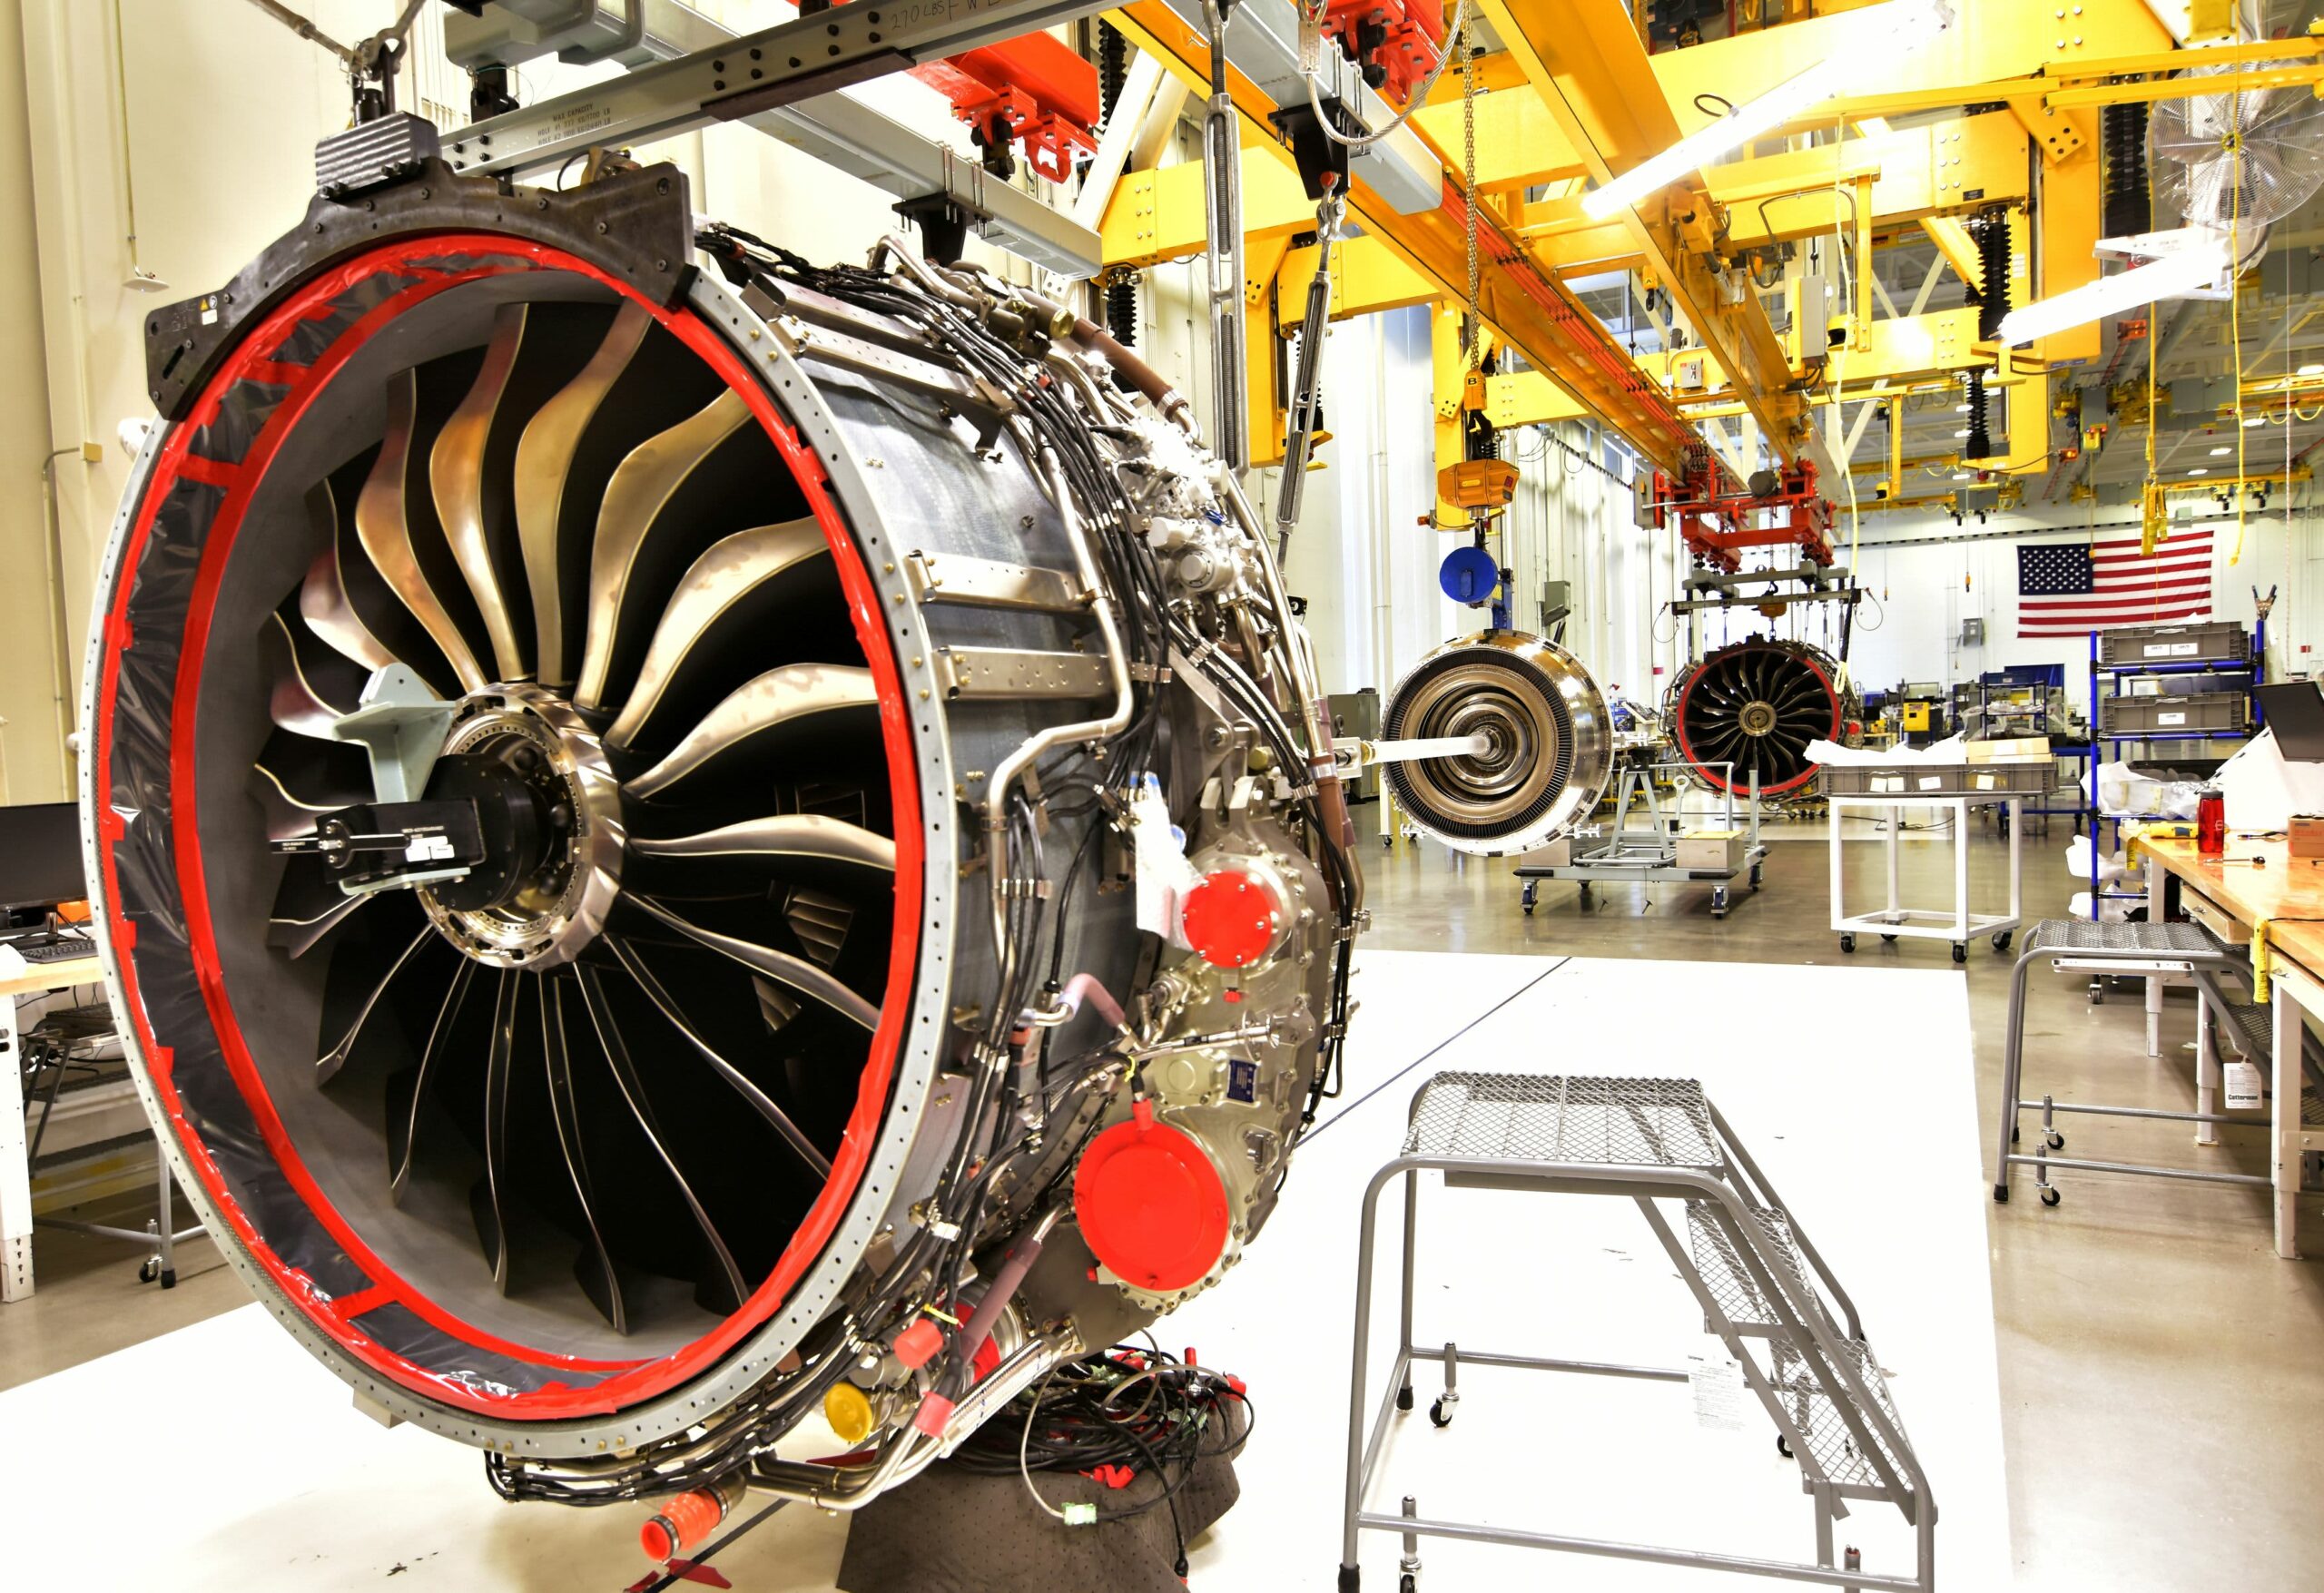 GE plane leasing unit to mix with rival lessor AerCap